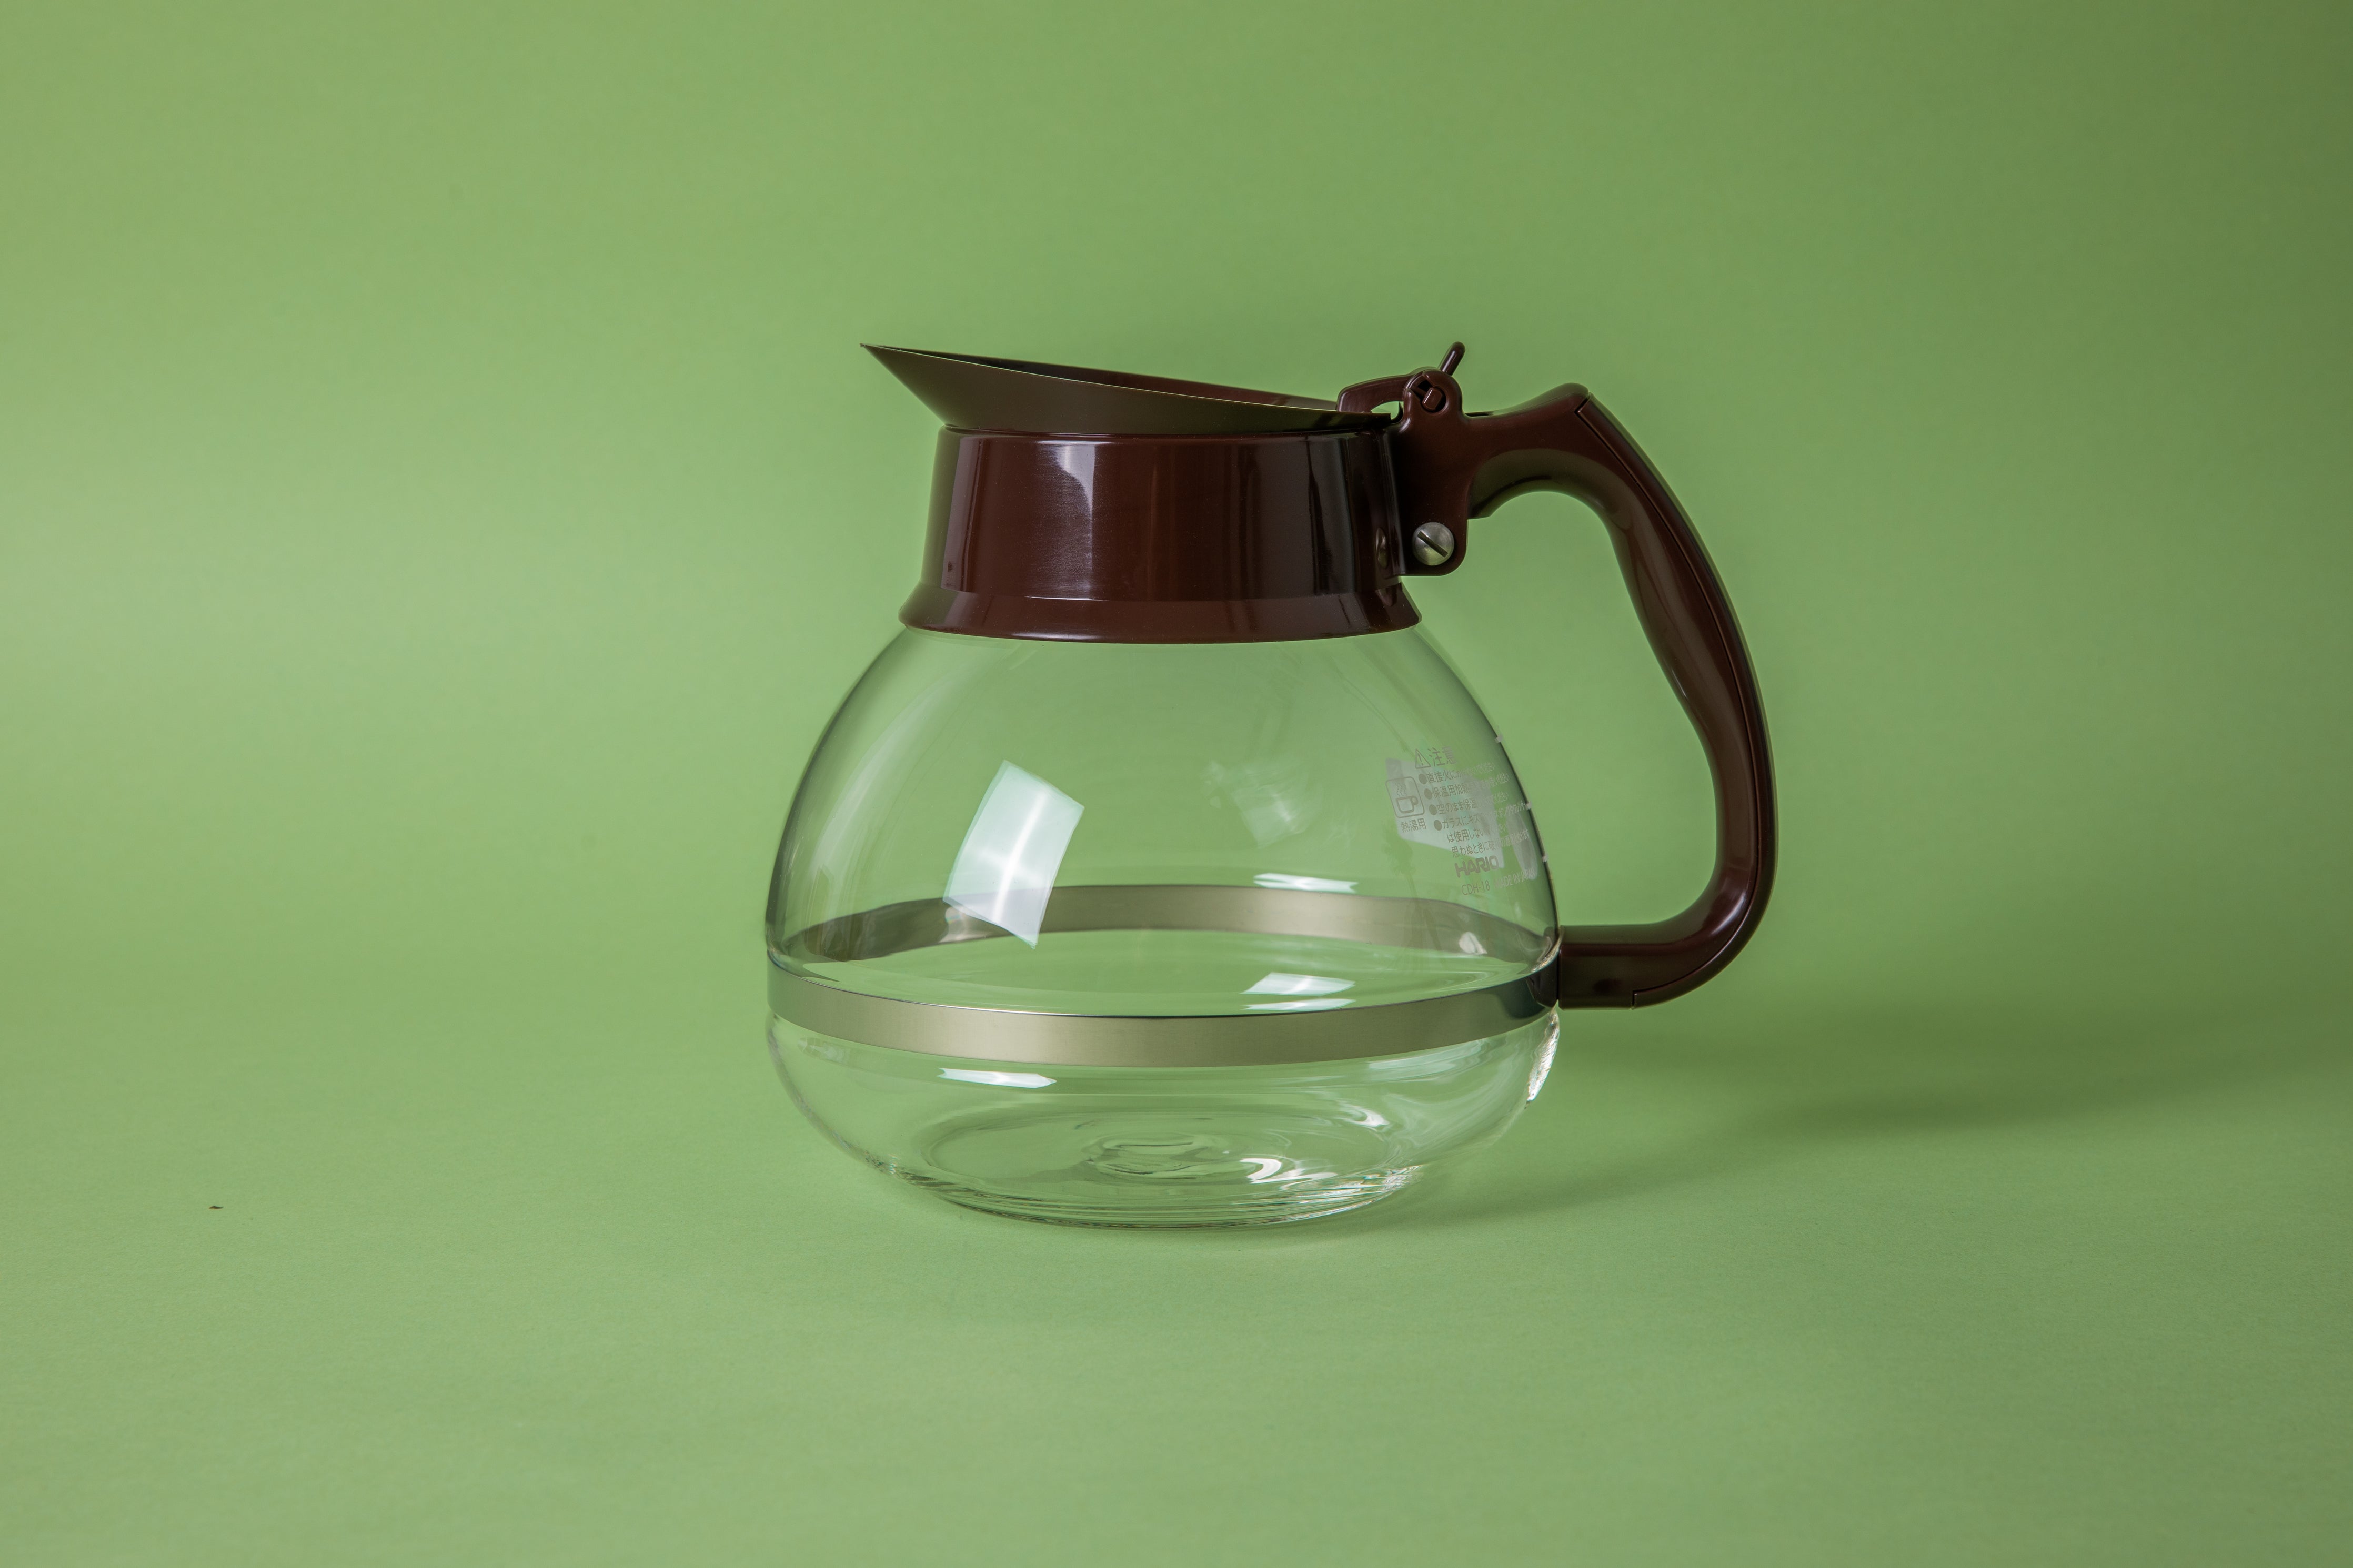 Creamer Carafe That Looks Like a Miniature Diner Coffee Pot